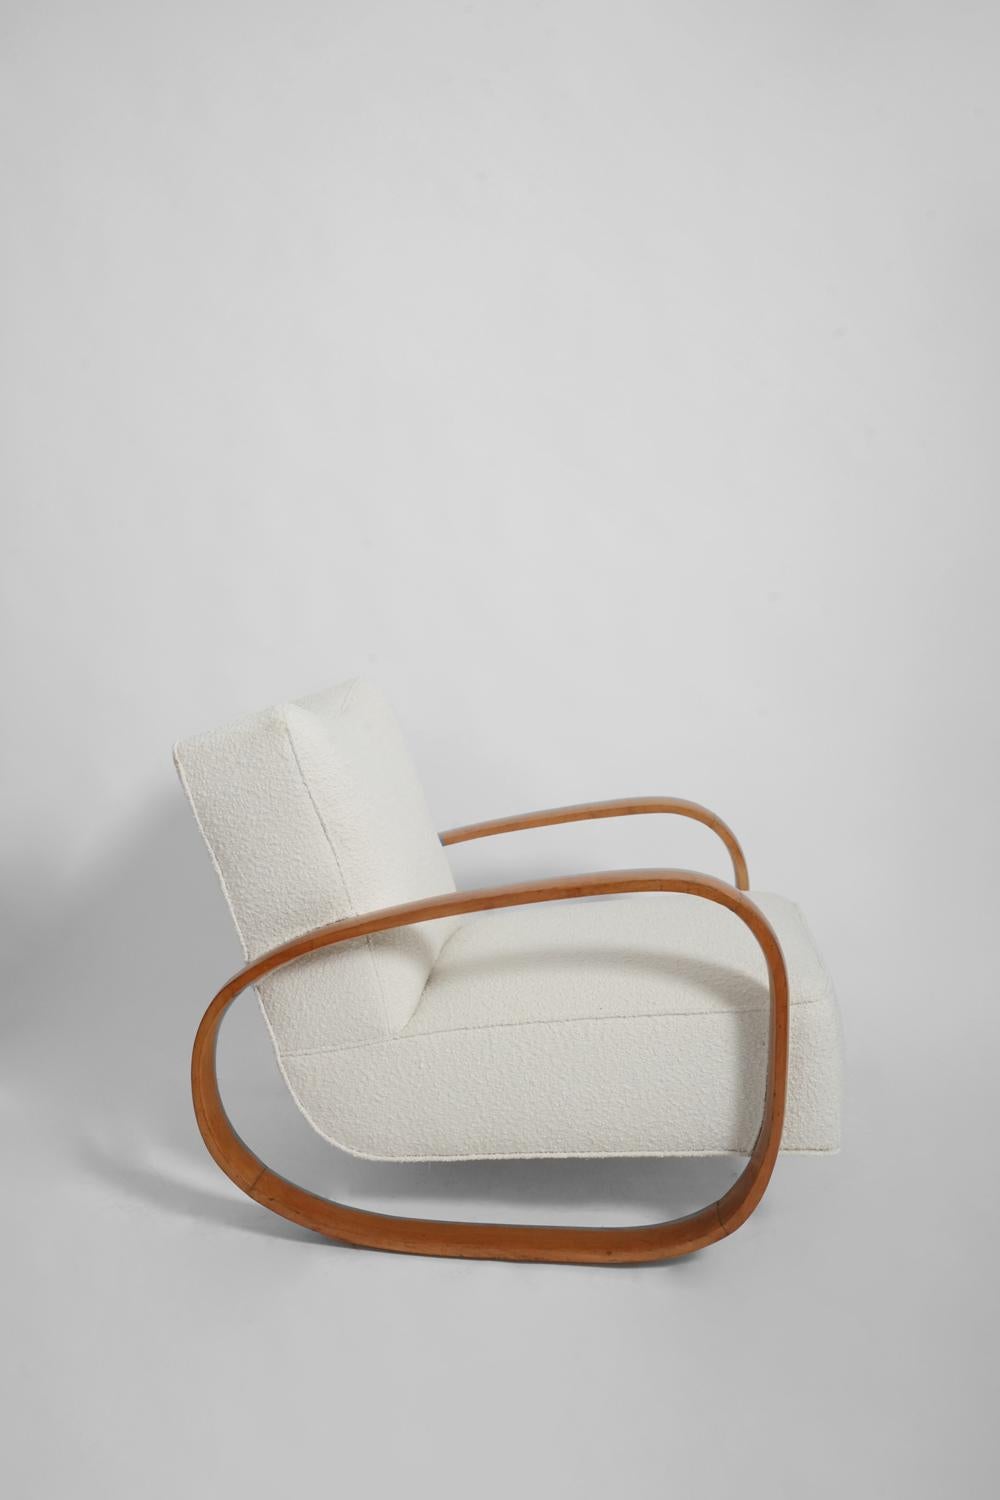 Space Age André Arbus style armchair, 1950s.